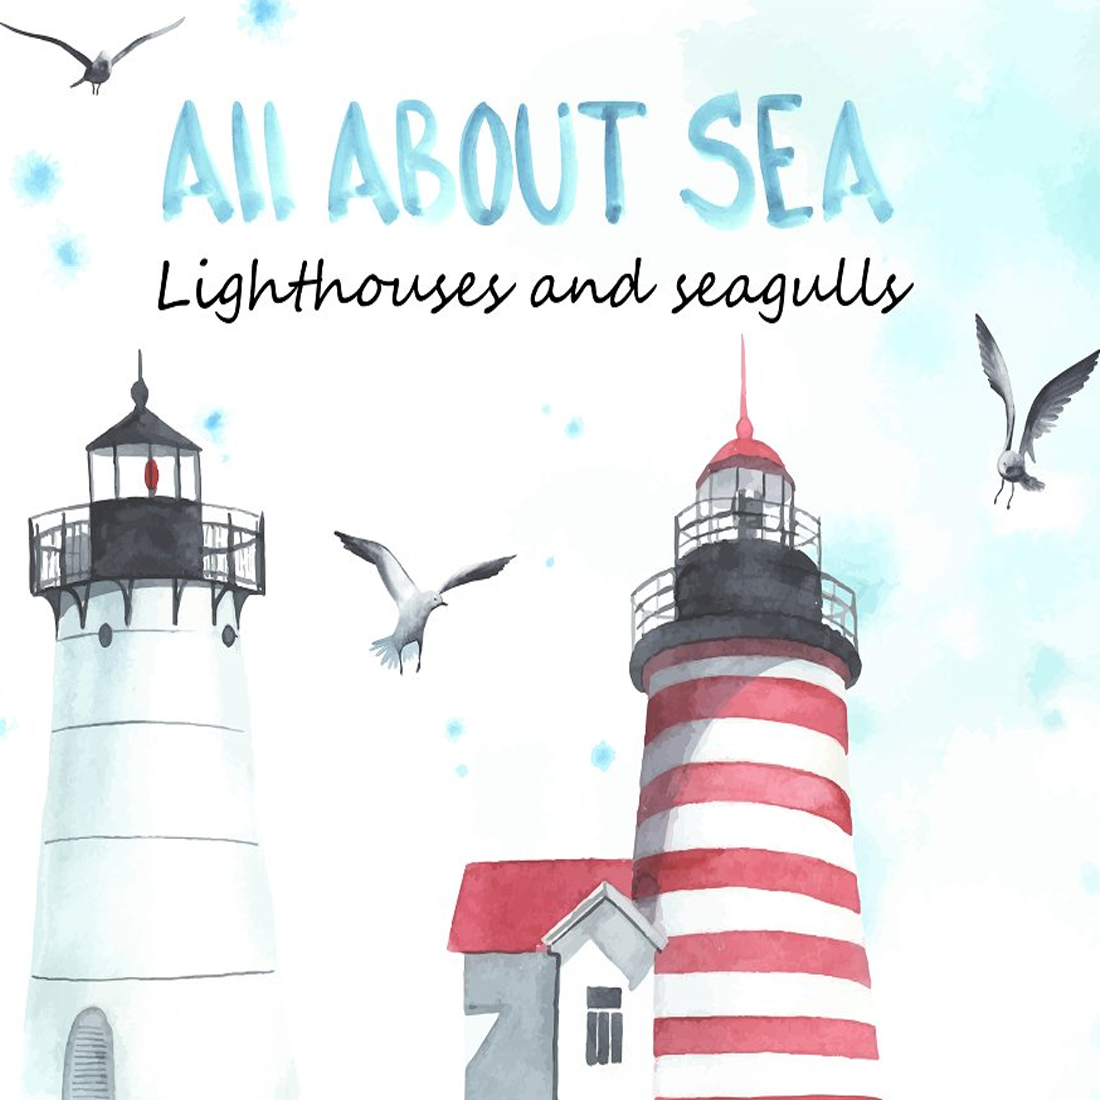 Images preview lighthouses and seagulls. watercolor.